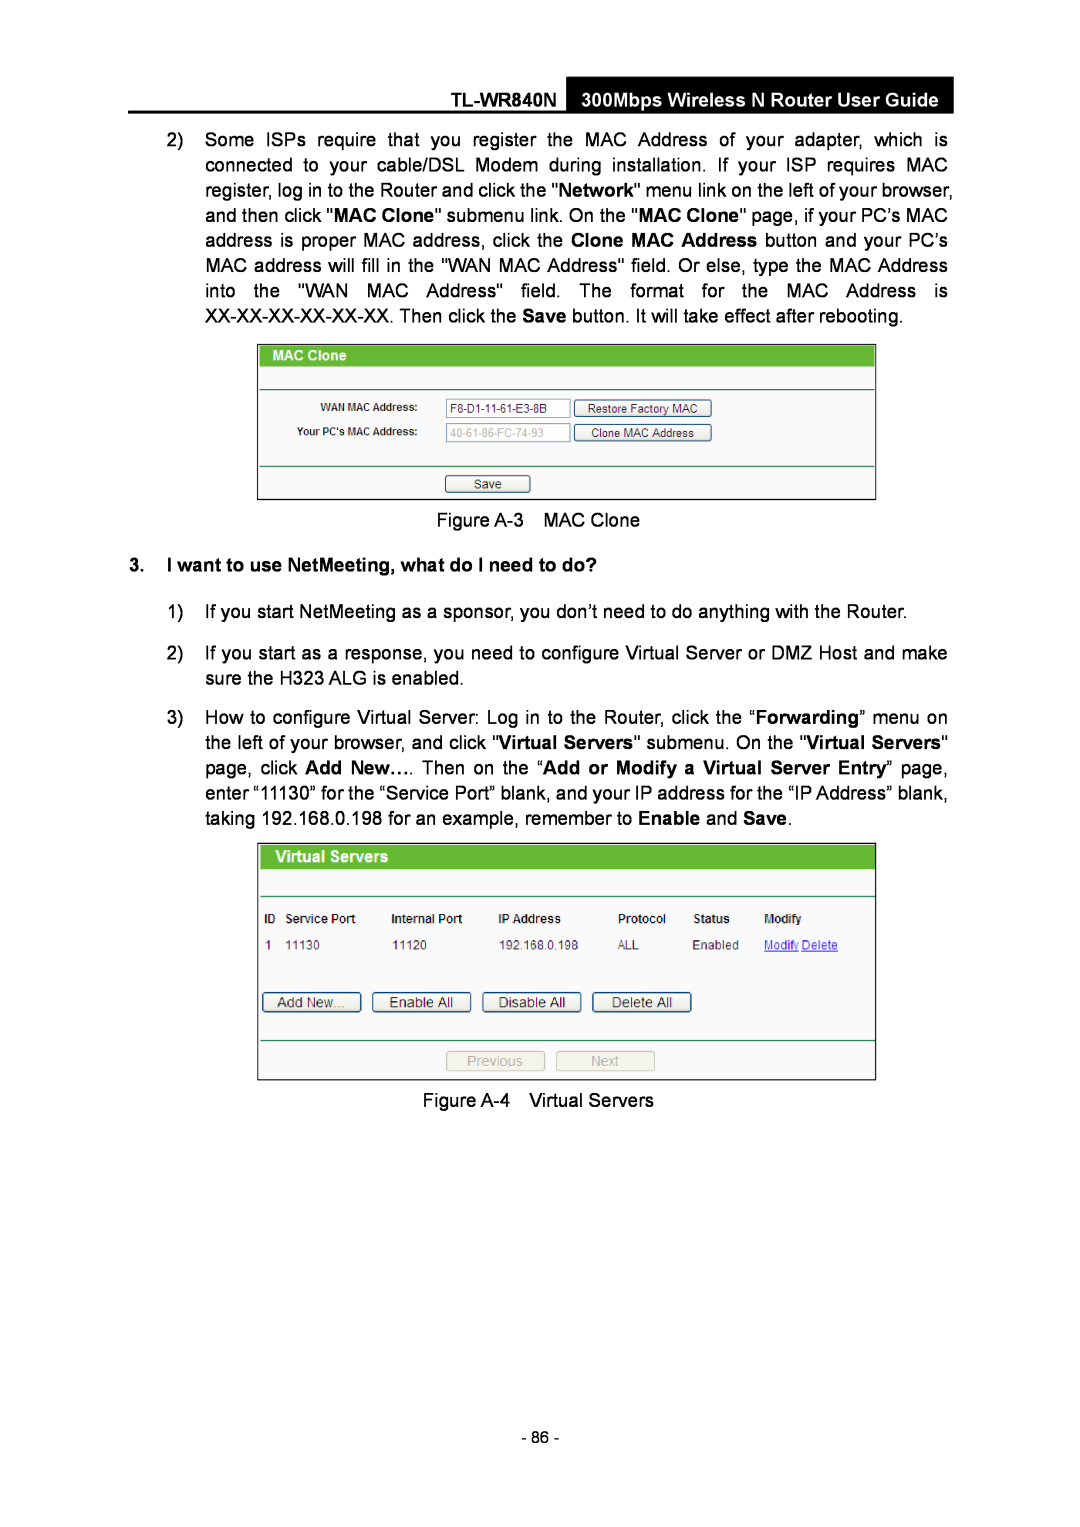 TP-Link manual I want to use NetMeeting, what do I need to do?, TL-WR840N 300Mbps Wireless N Router User Guide 